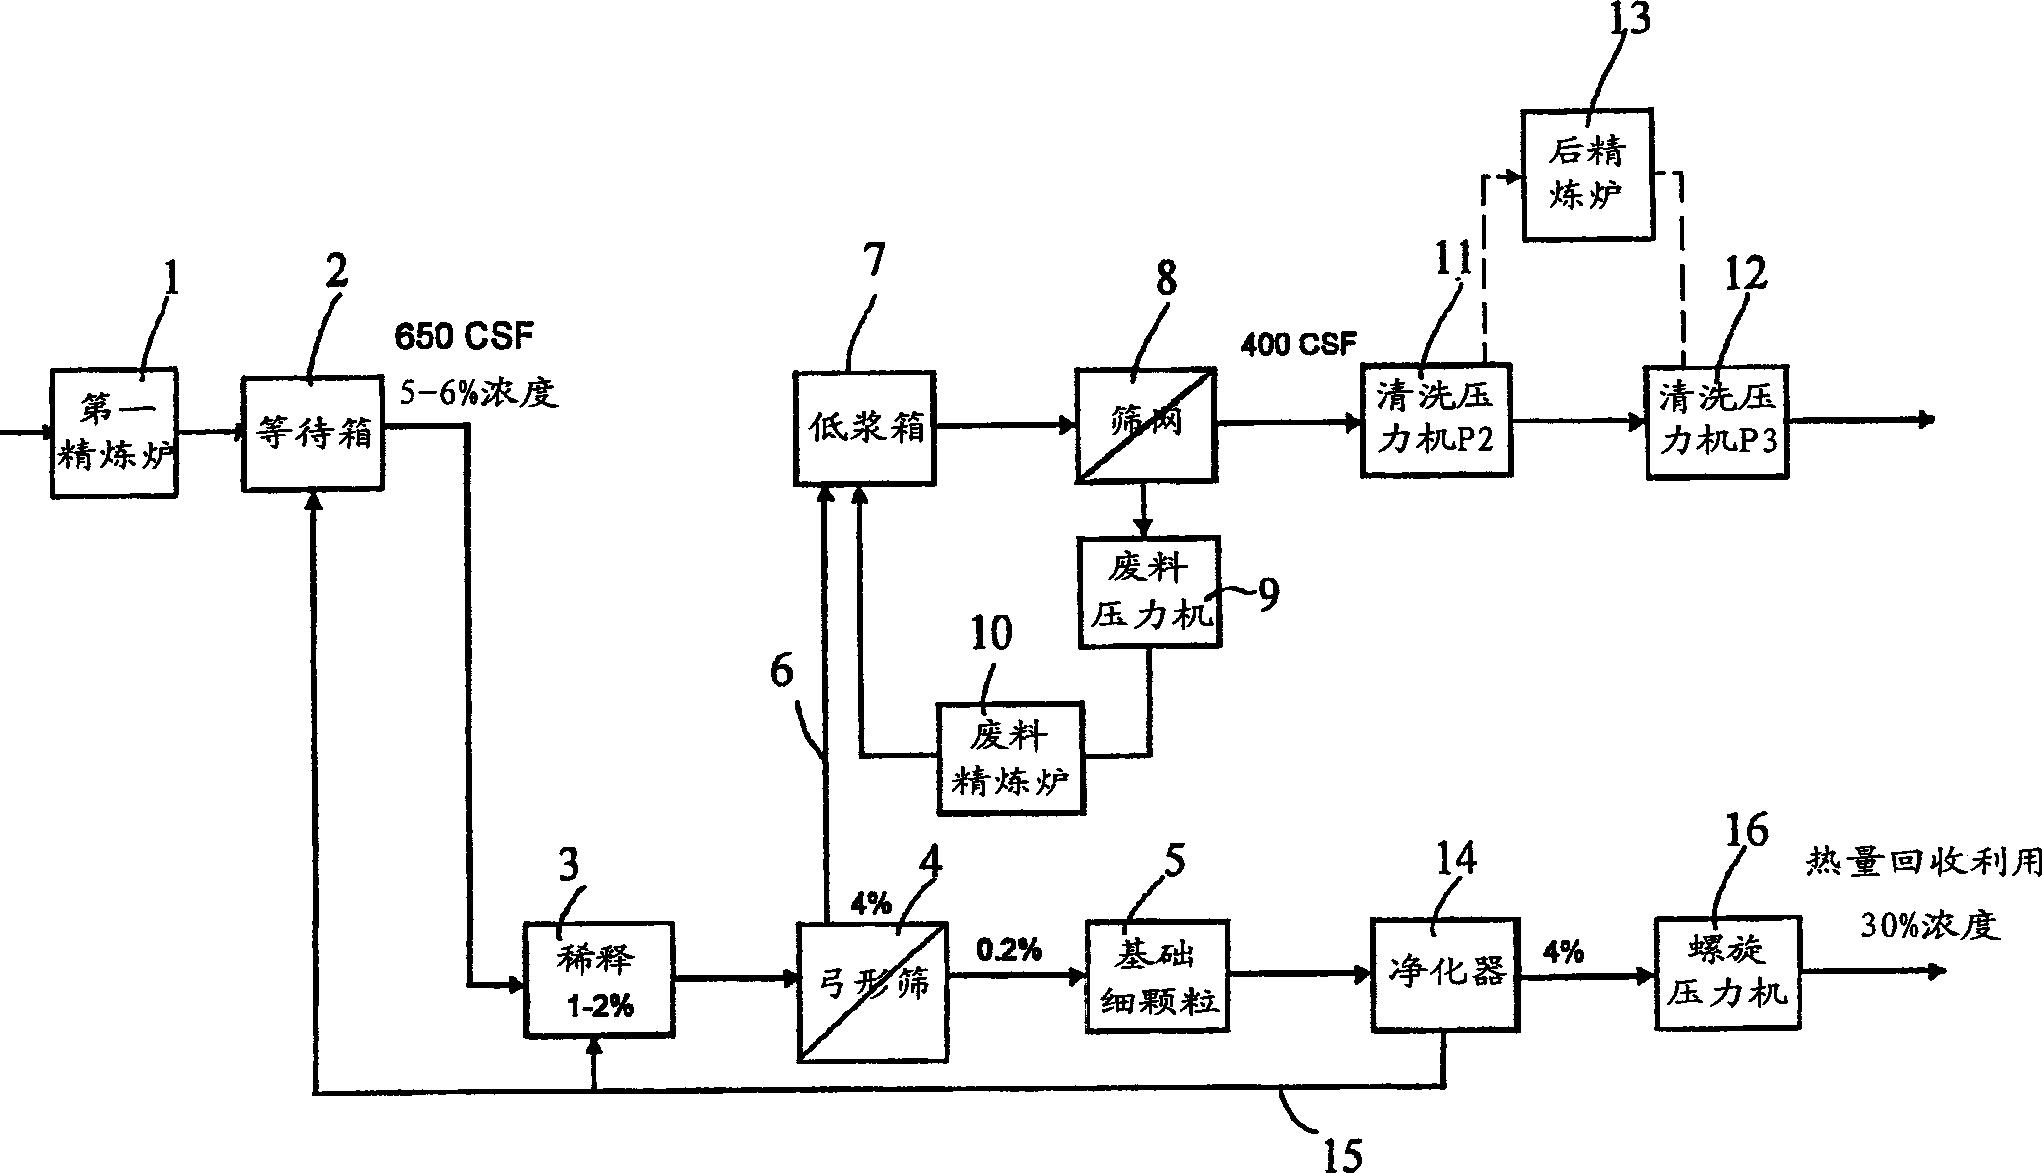 Method for production of mechanical pulp